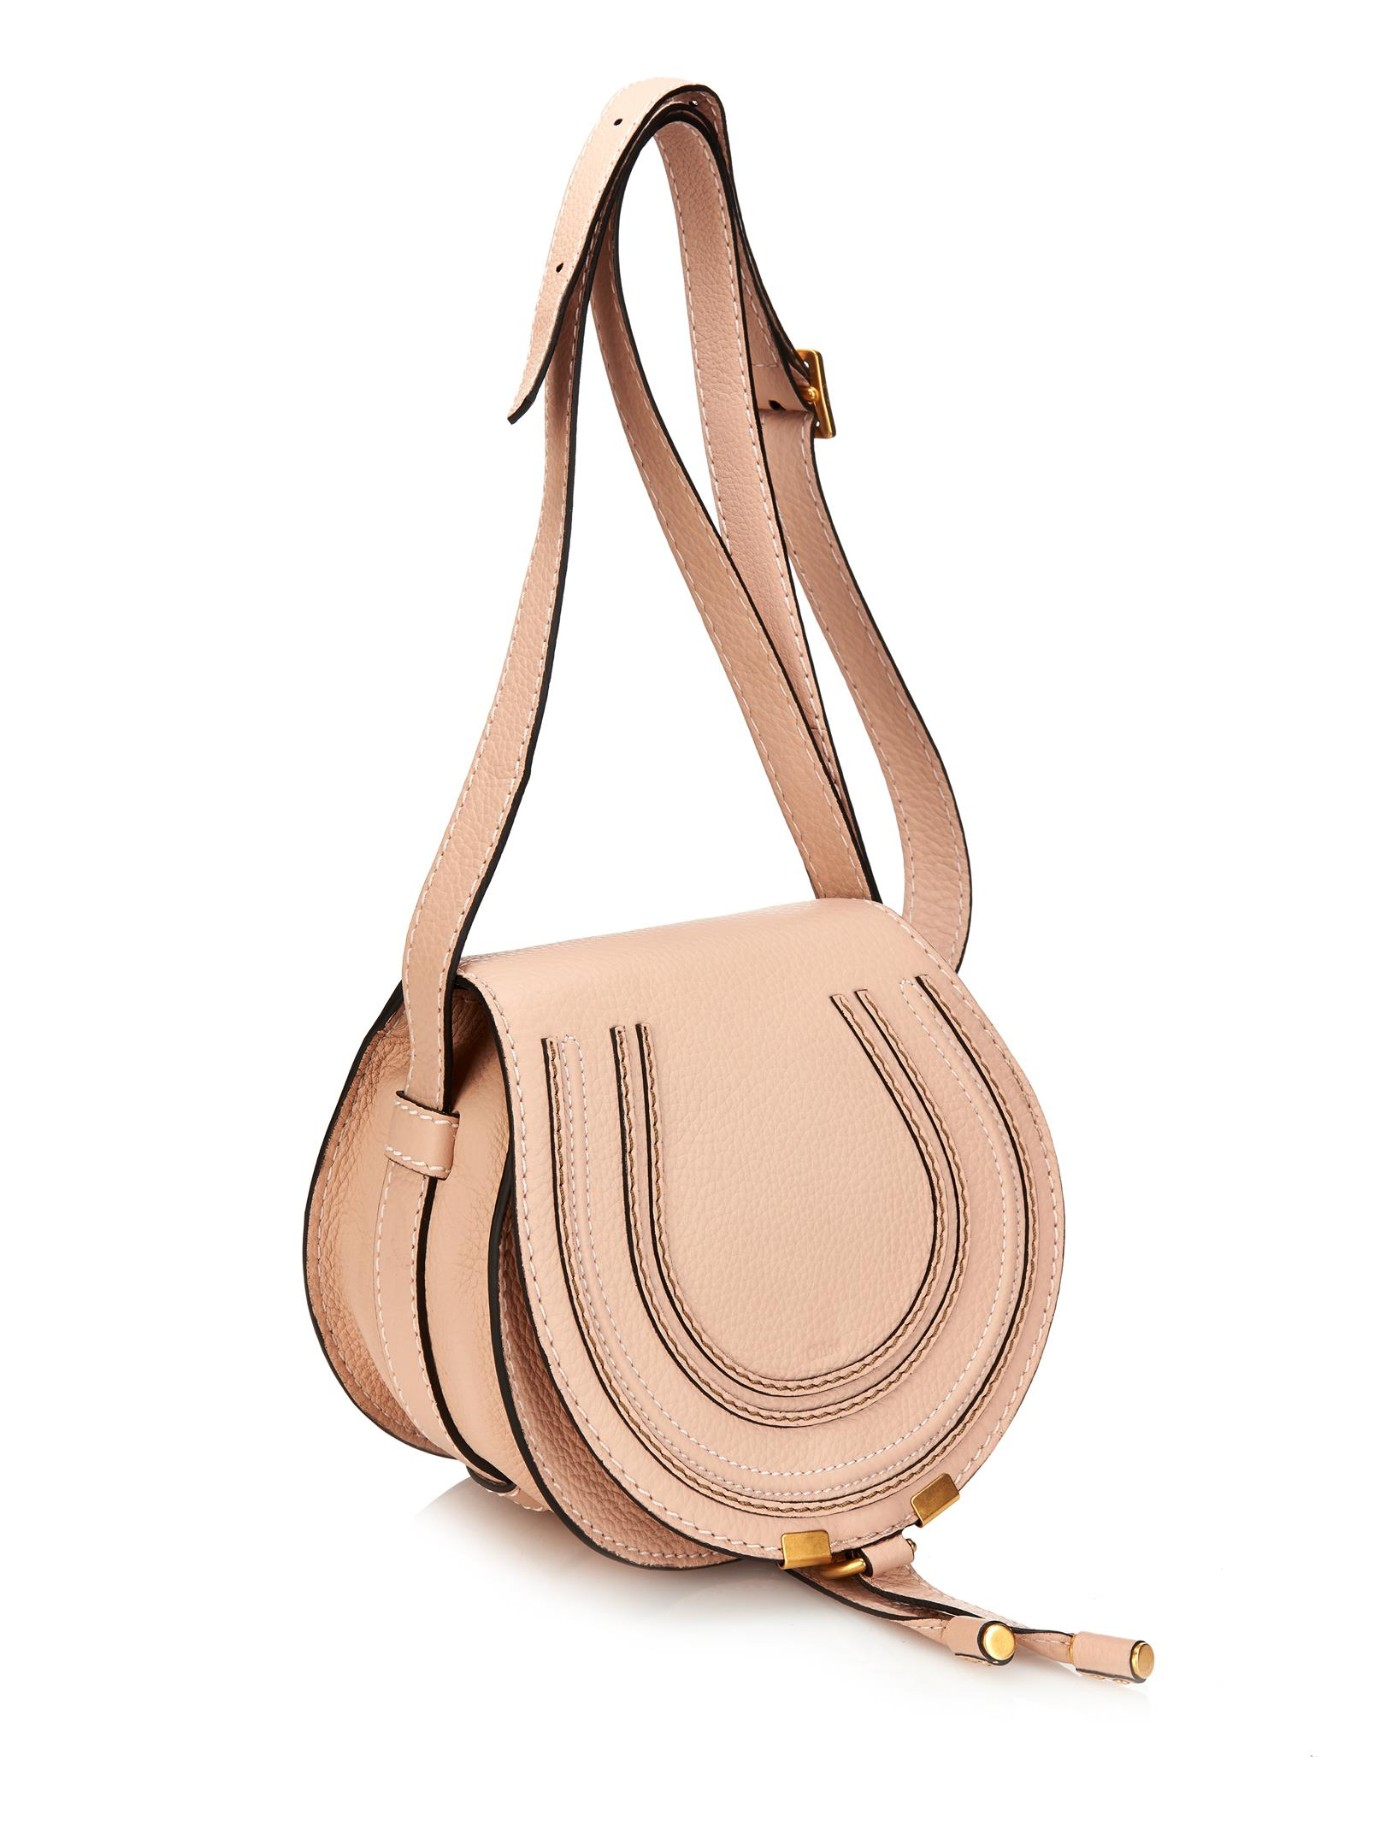 Chloé Marcie Small Cross-Body Bag in Light Pink (Pink) - Lyst